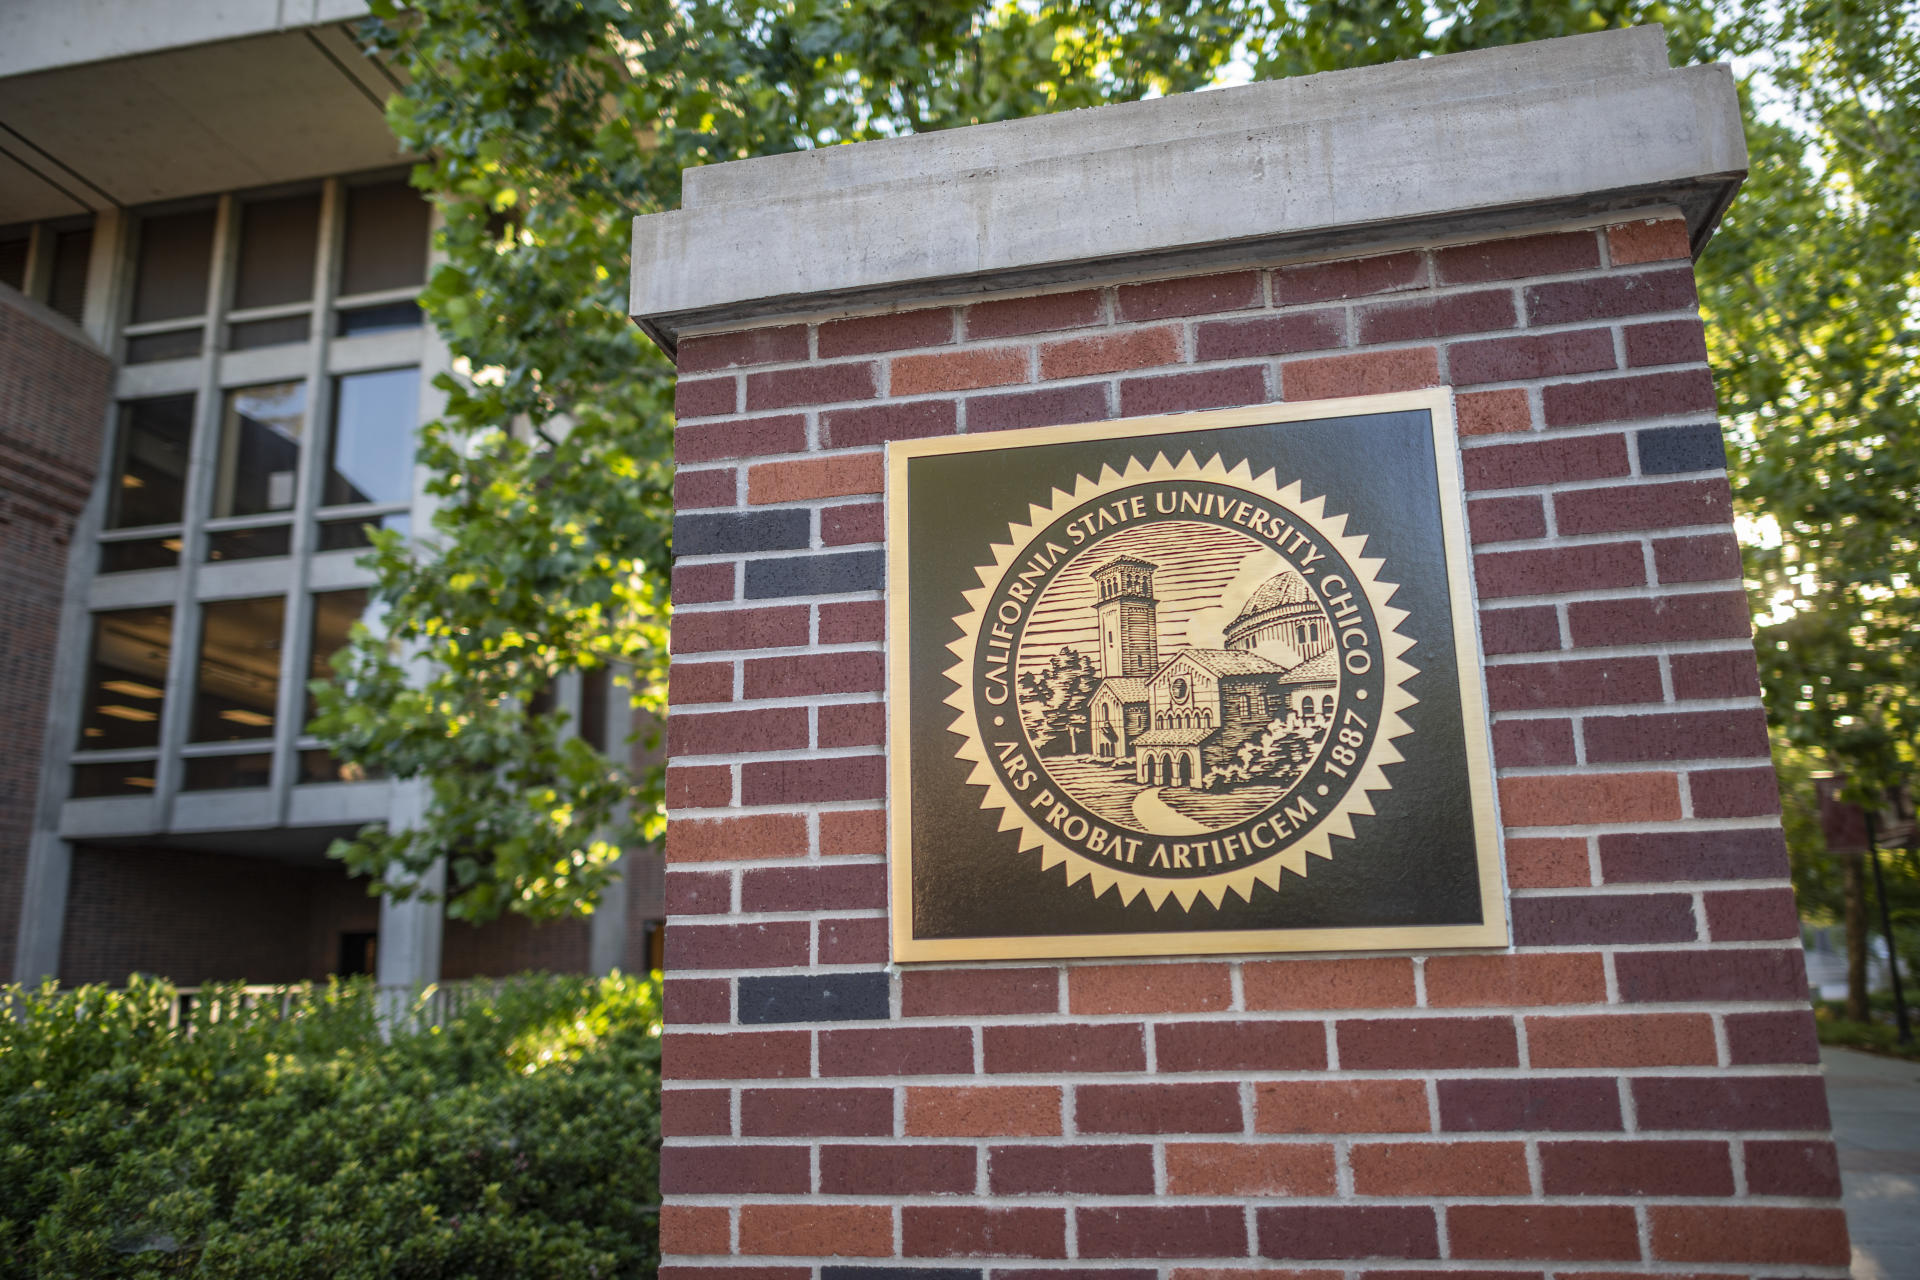 The University seal is seen on a brick pillar with trees and the library in the background.